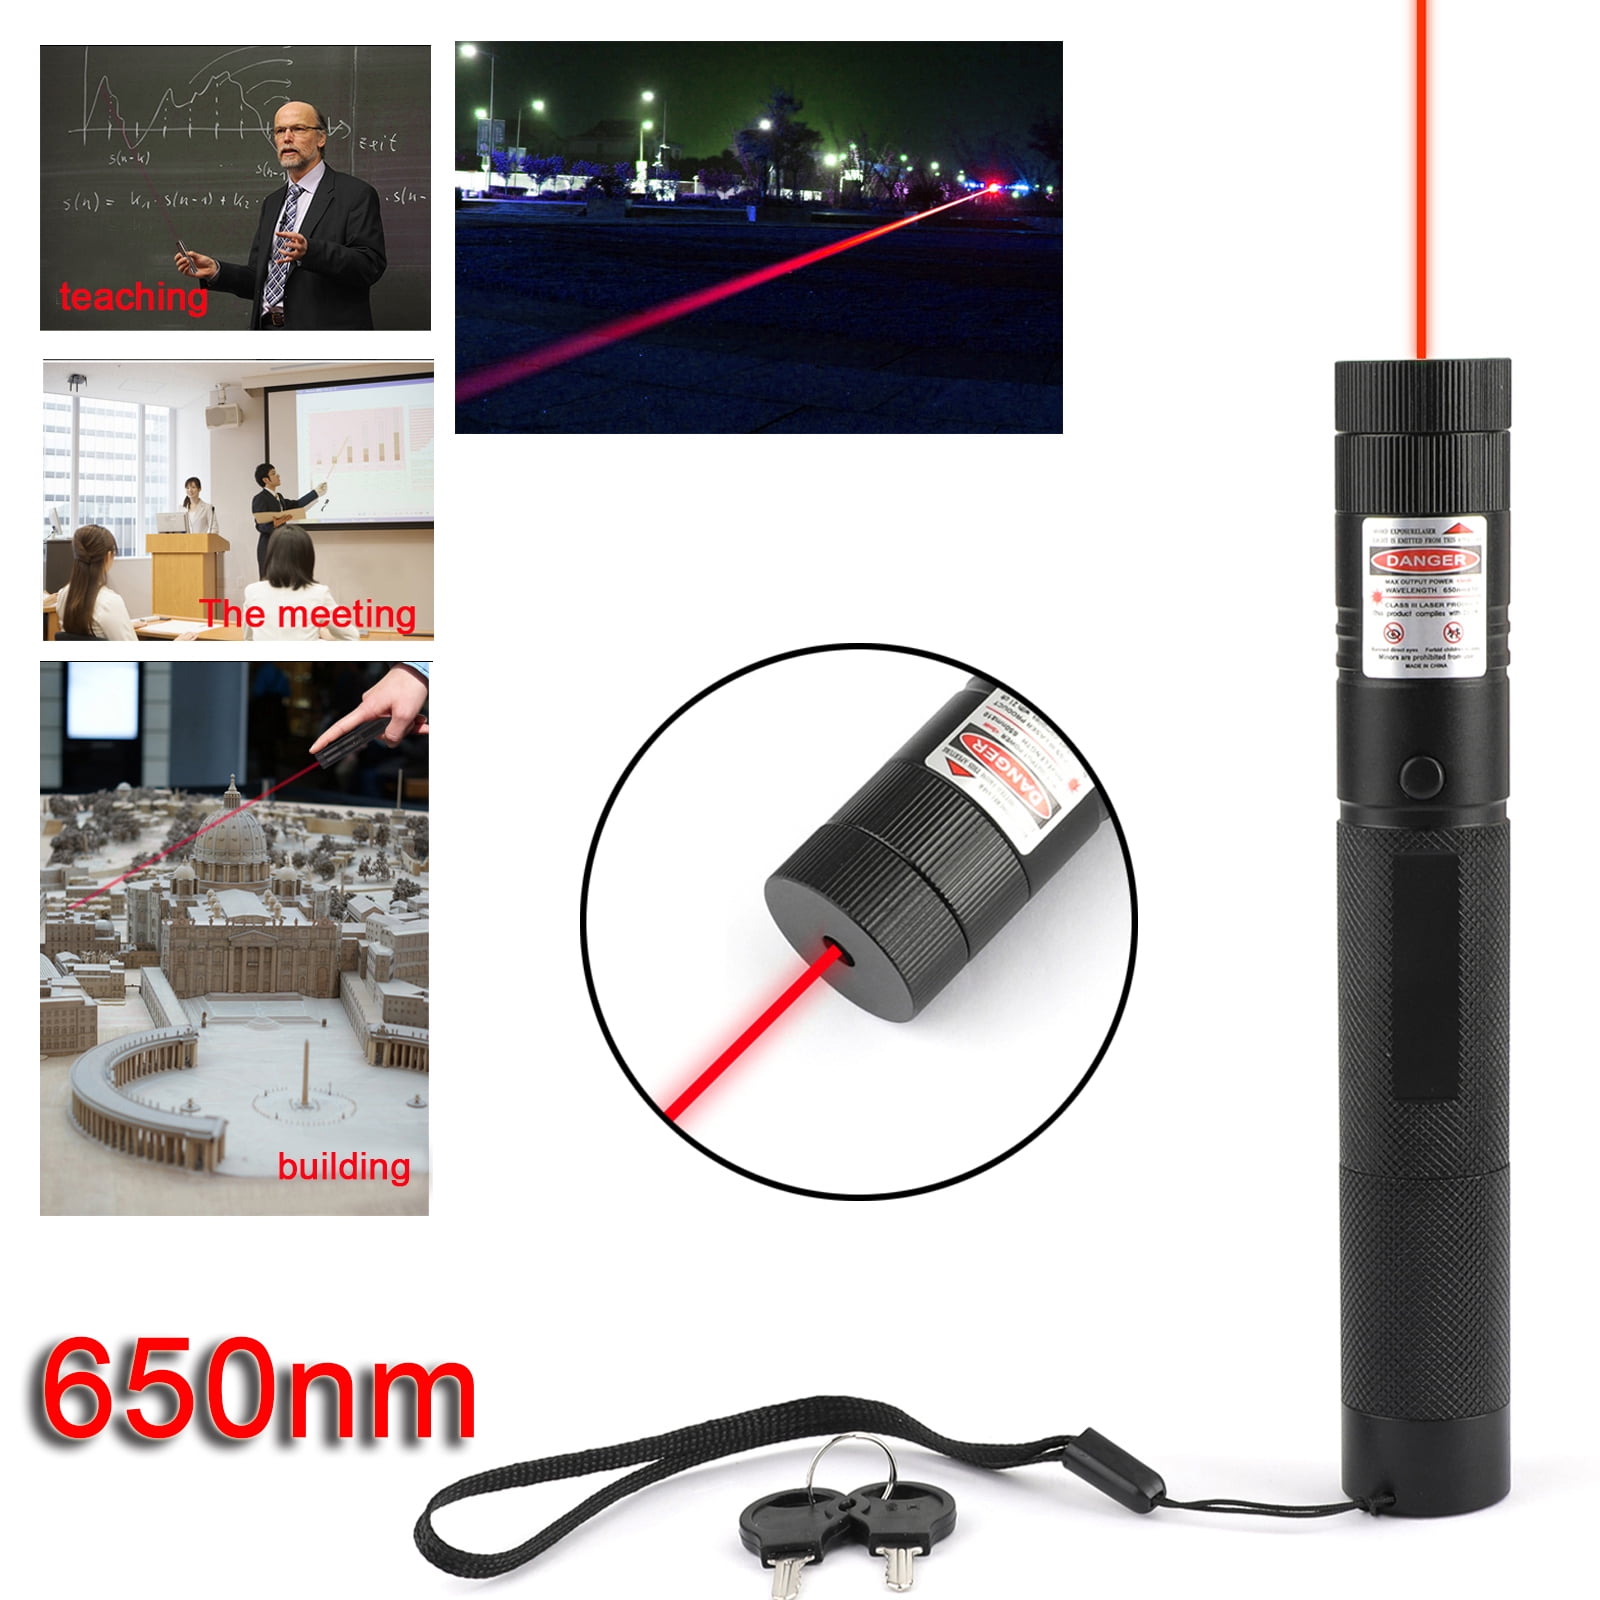 Charger& Battery 900Miles 650nm Red Laser Pointer Pen 1-W Visible Beam Light 